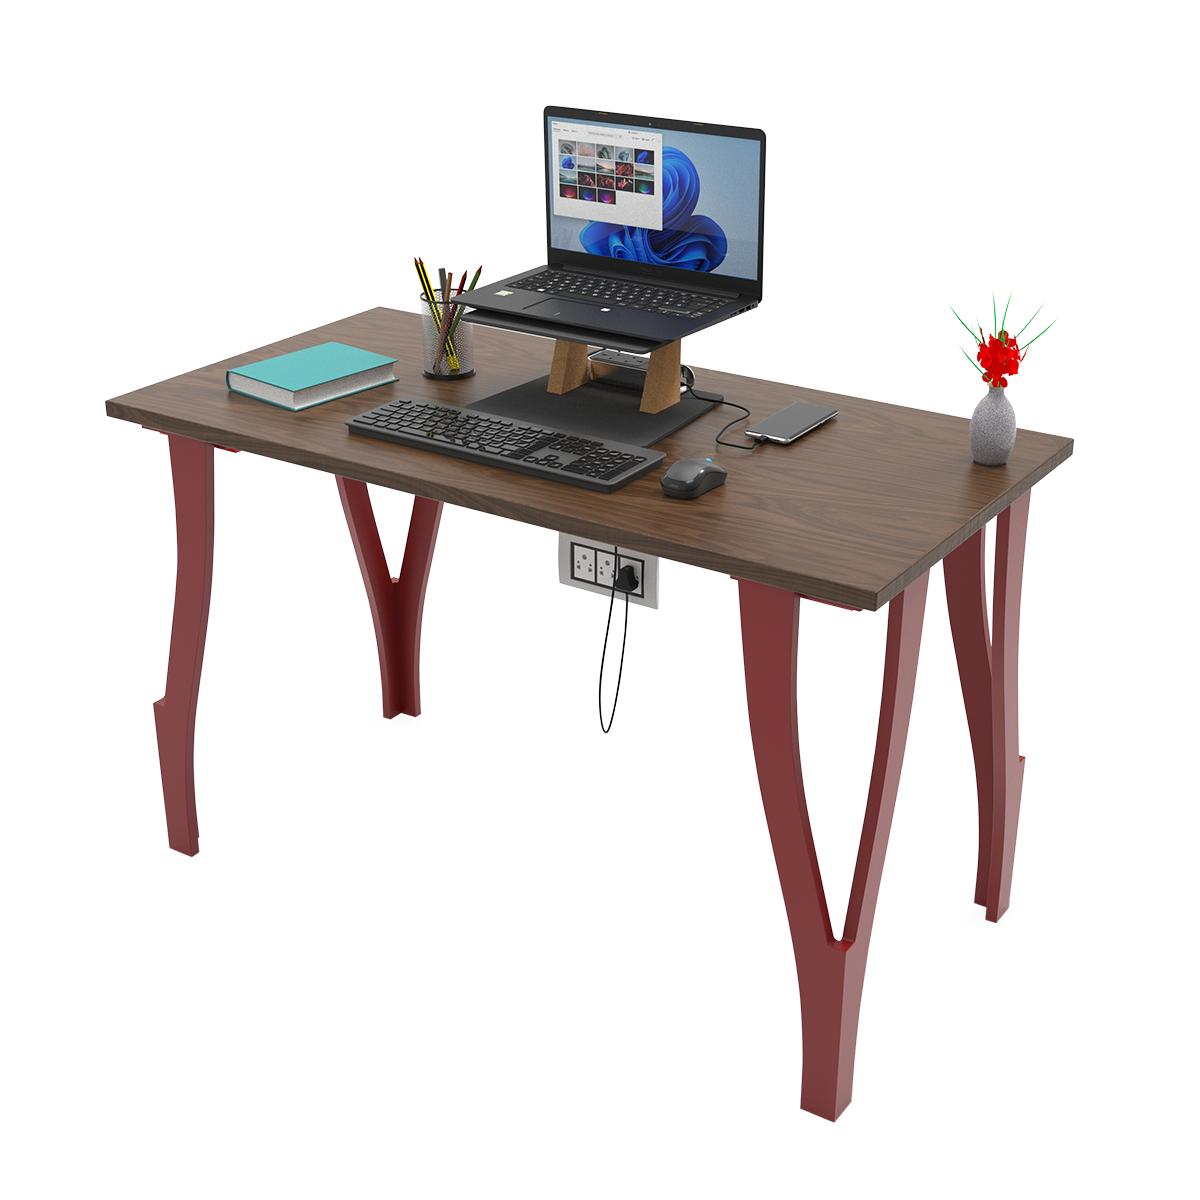 Wishbone Table with PowErgo: Ergonomic table with laptop support and power manager